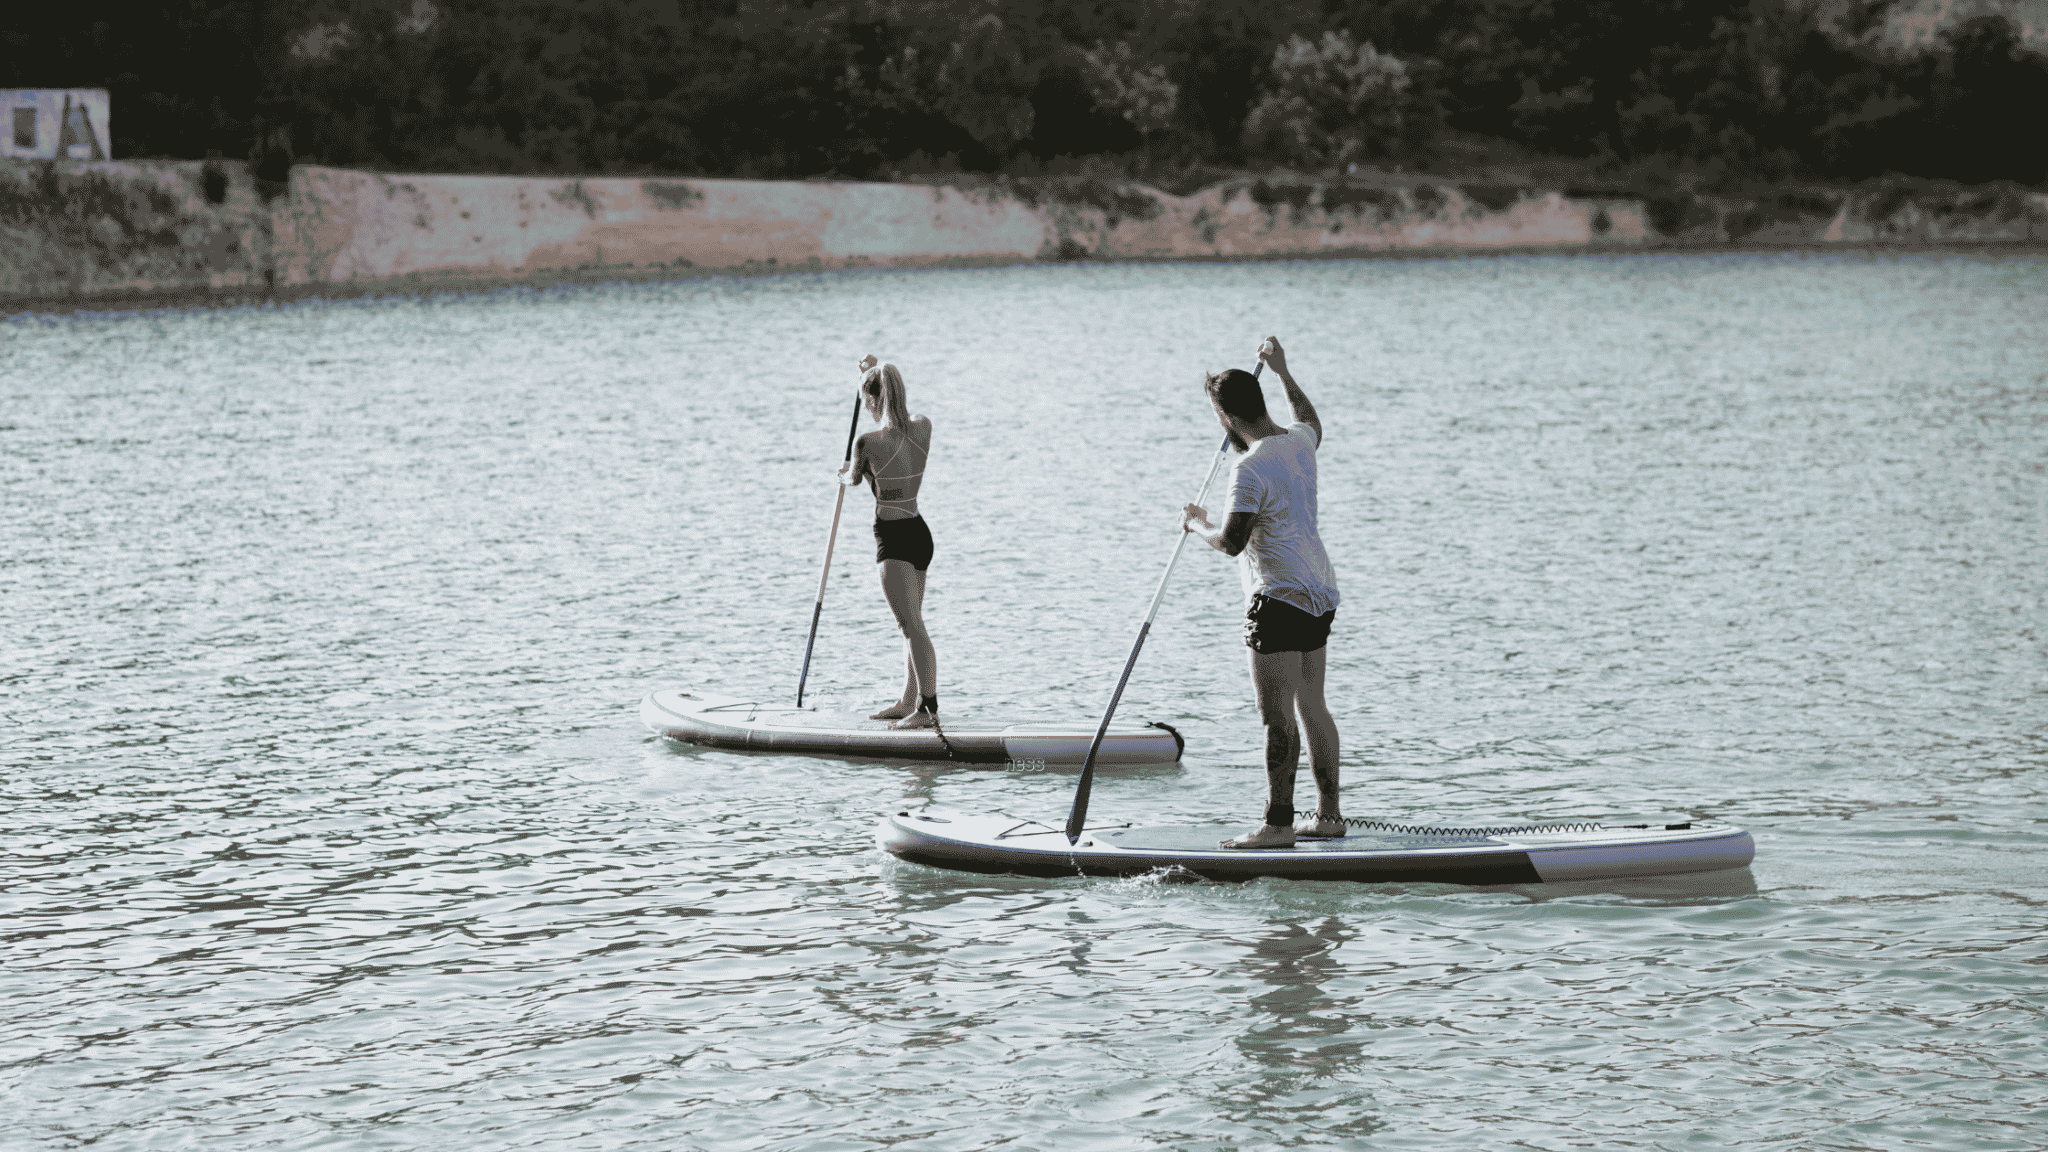 man and woman on standup paddleboards in a lake